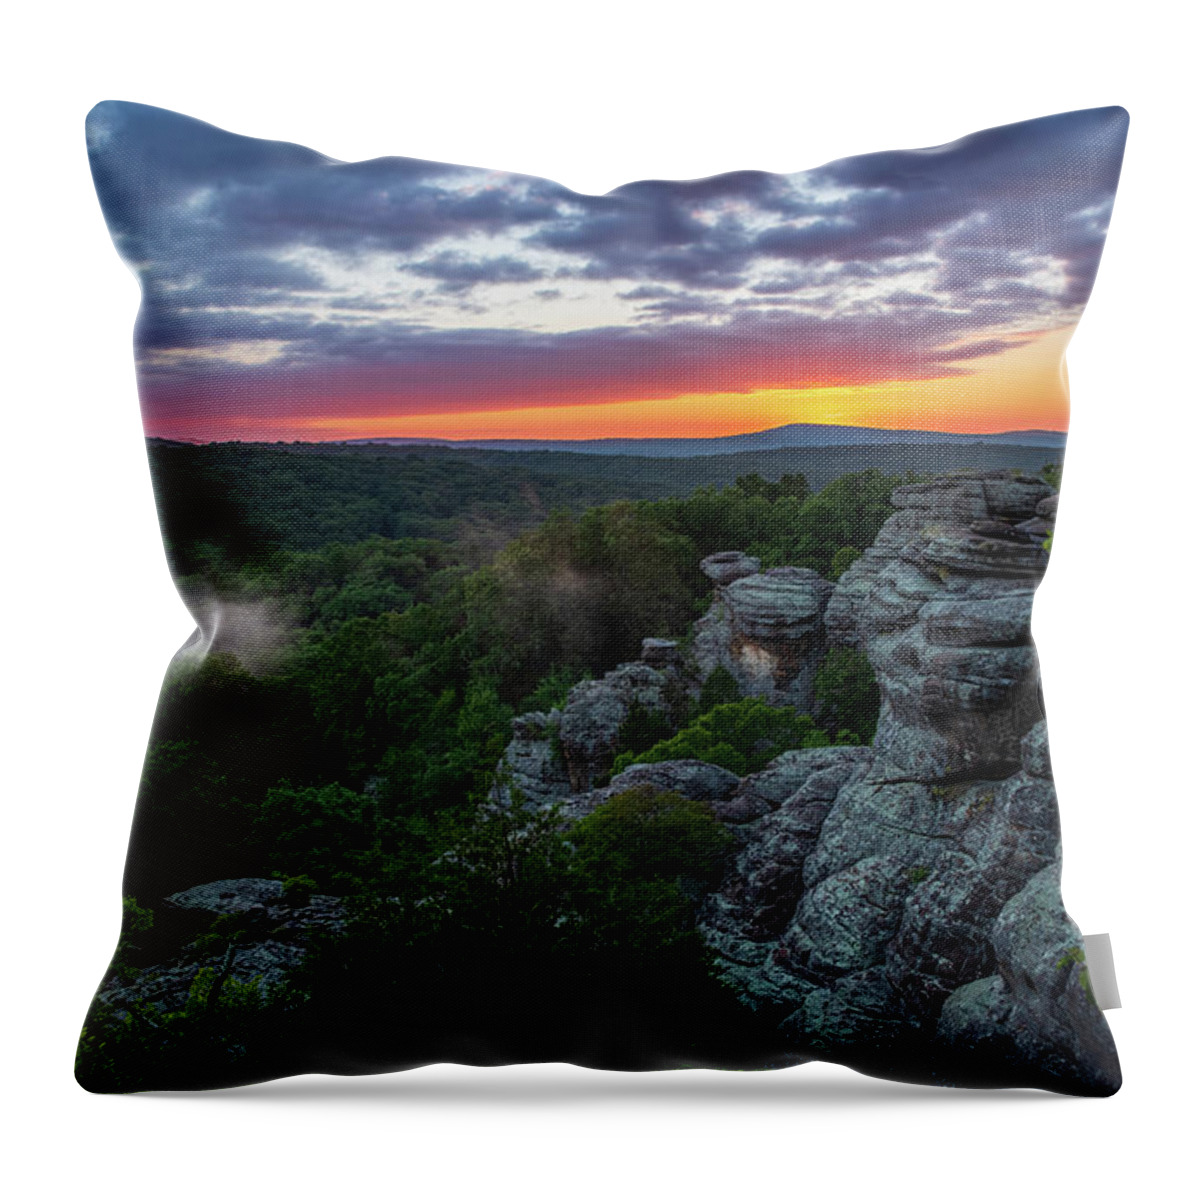 Sunset Throw Pillow featuring the photograph Sunset at the Garden by Grant Twiss